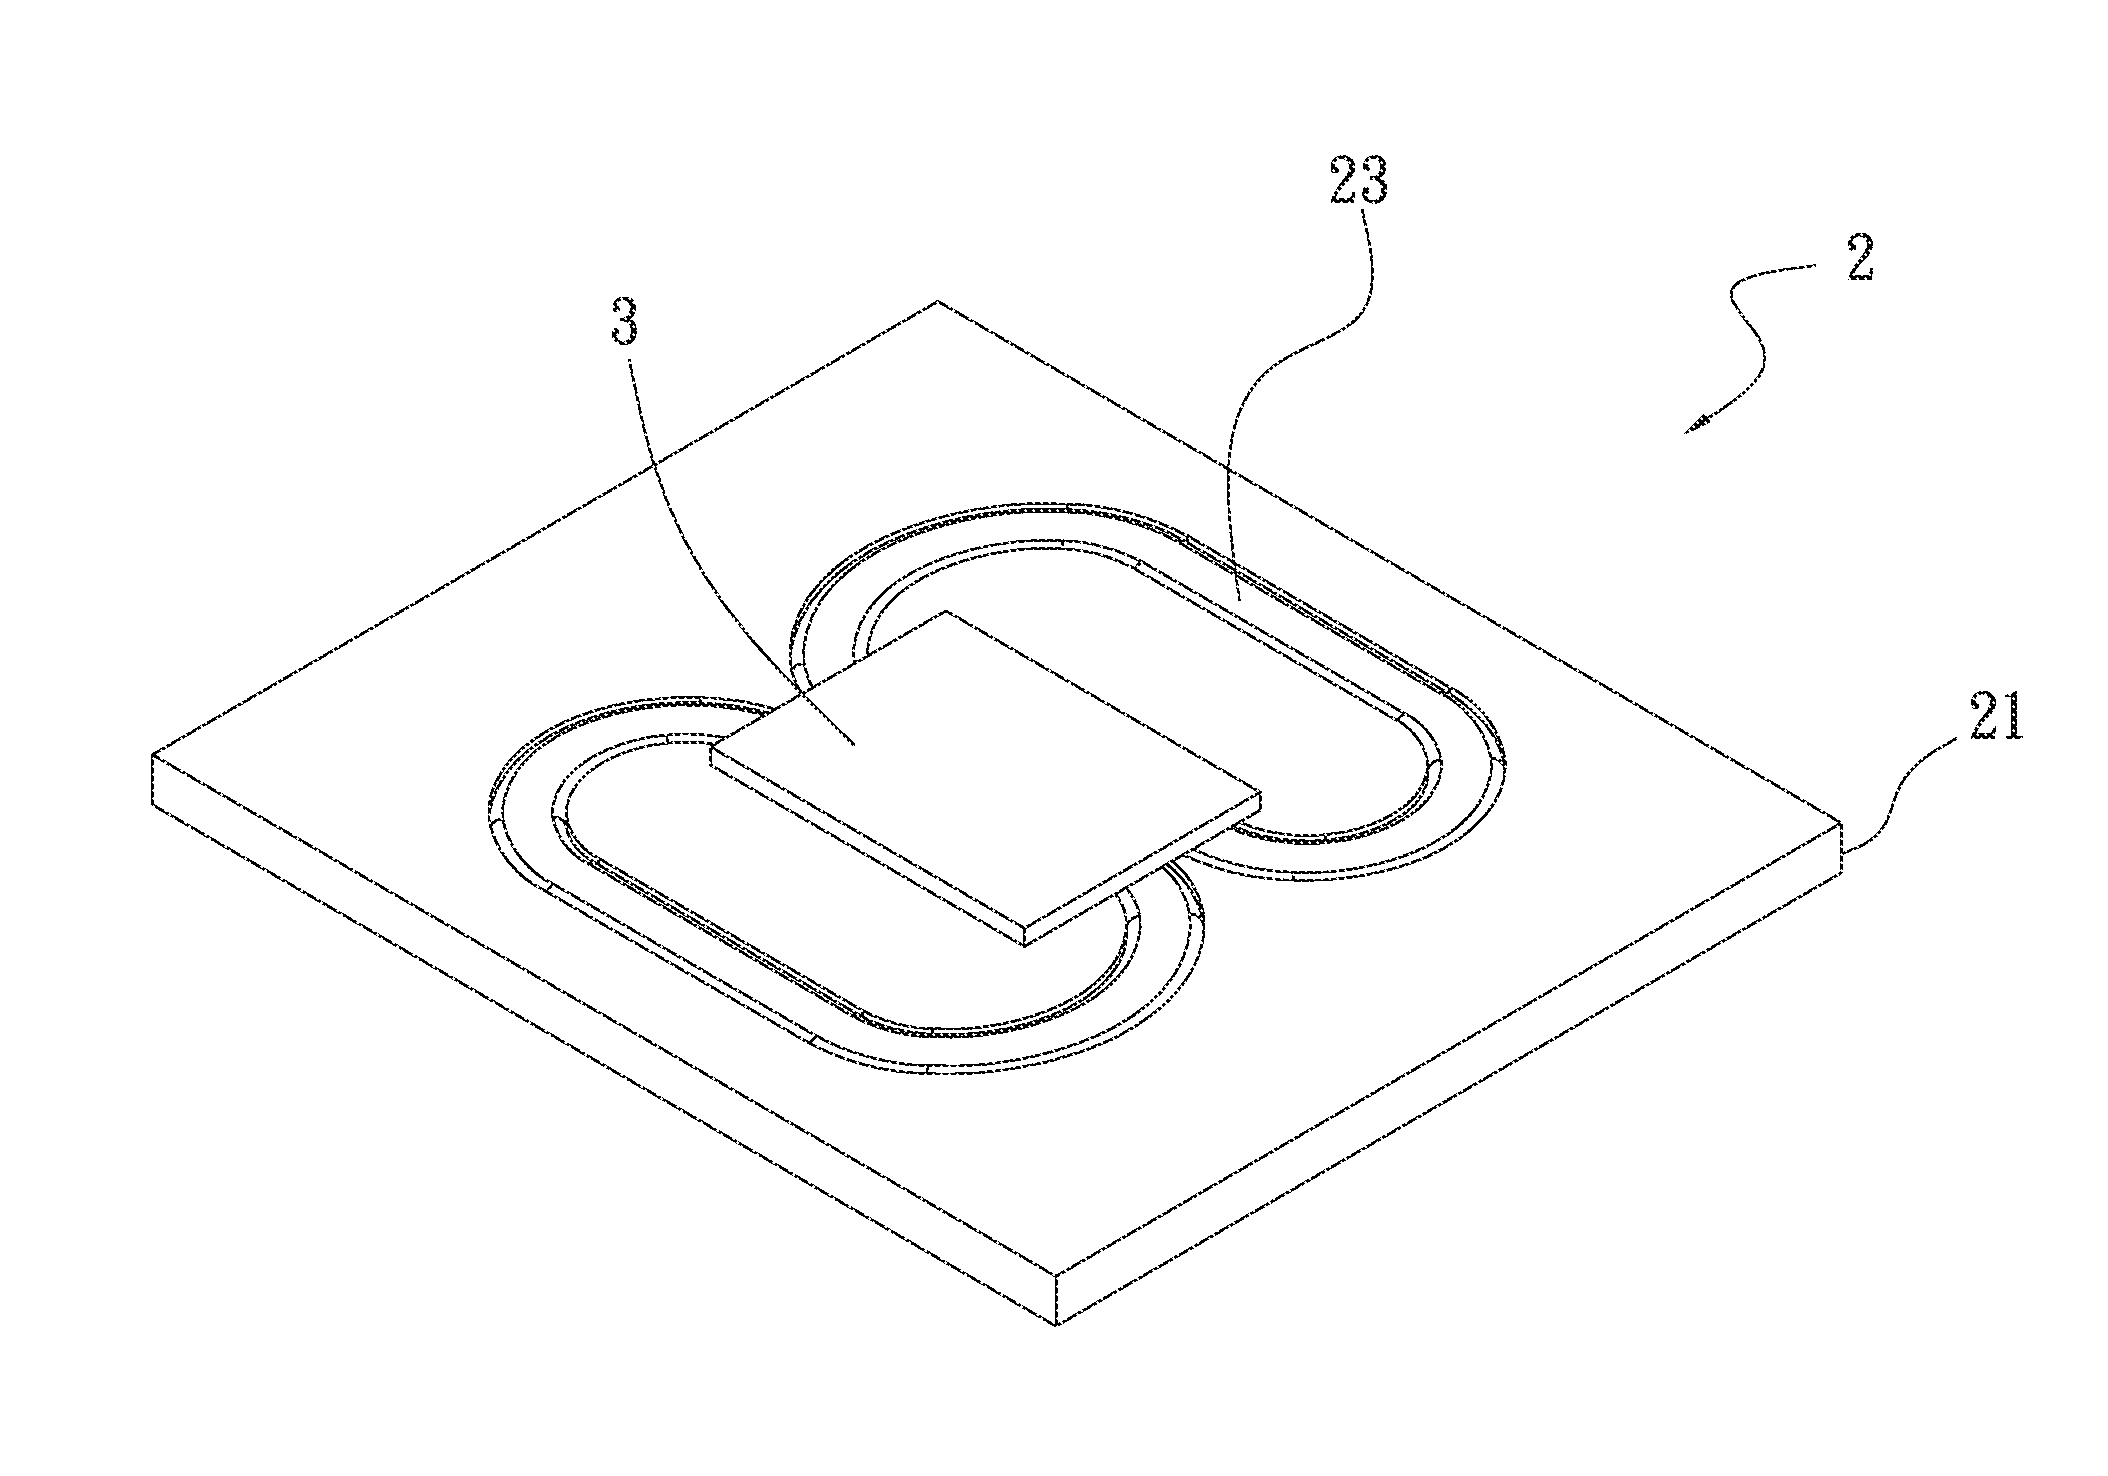 Heat-dissipating device